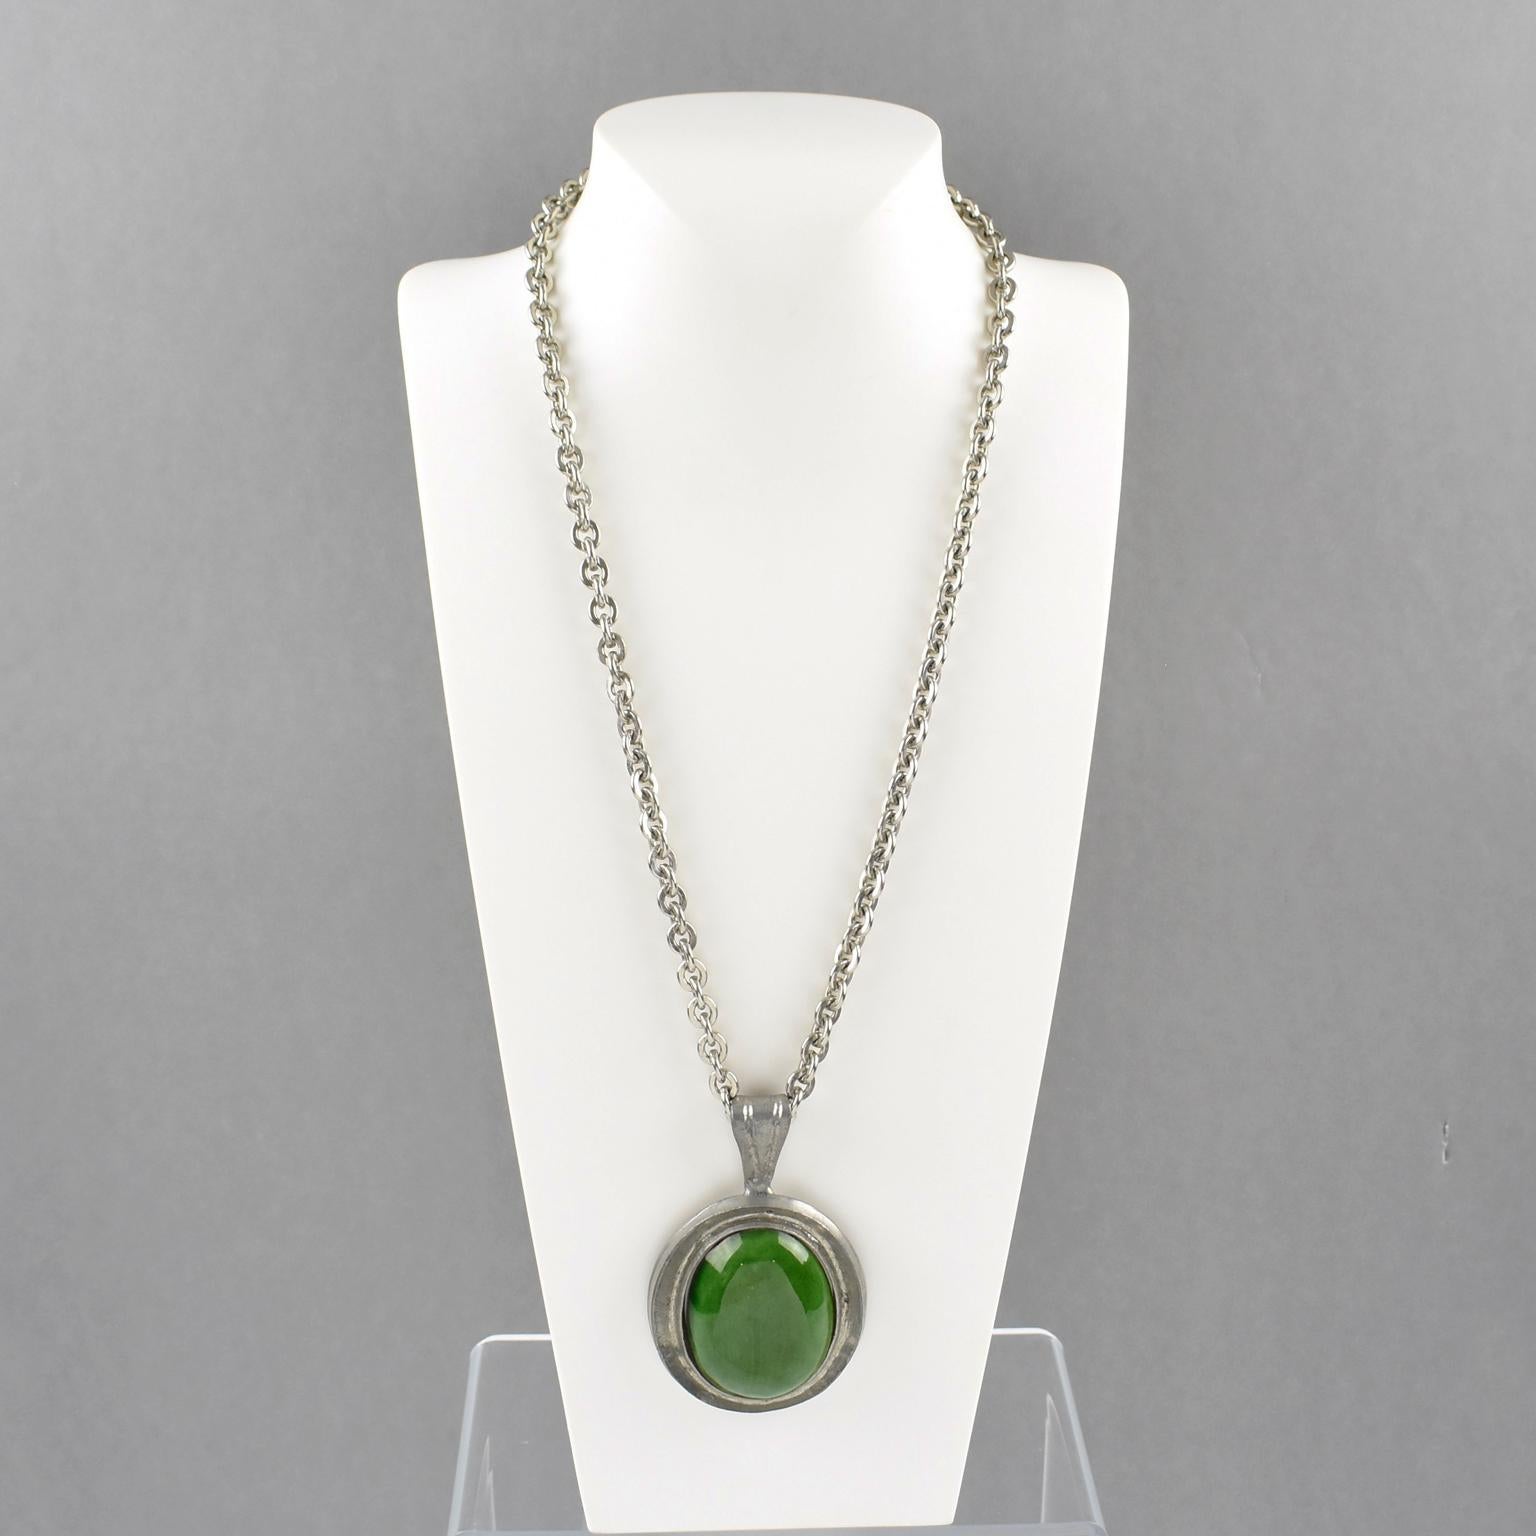 Modernist Space Age Pewter Necklace with Green Ceramic Pendant For Sale